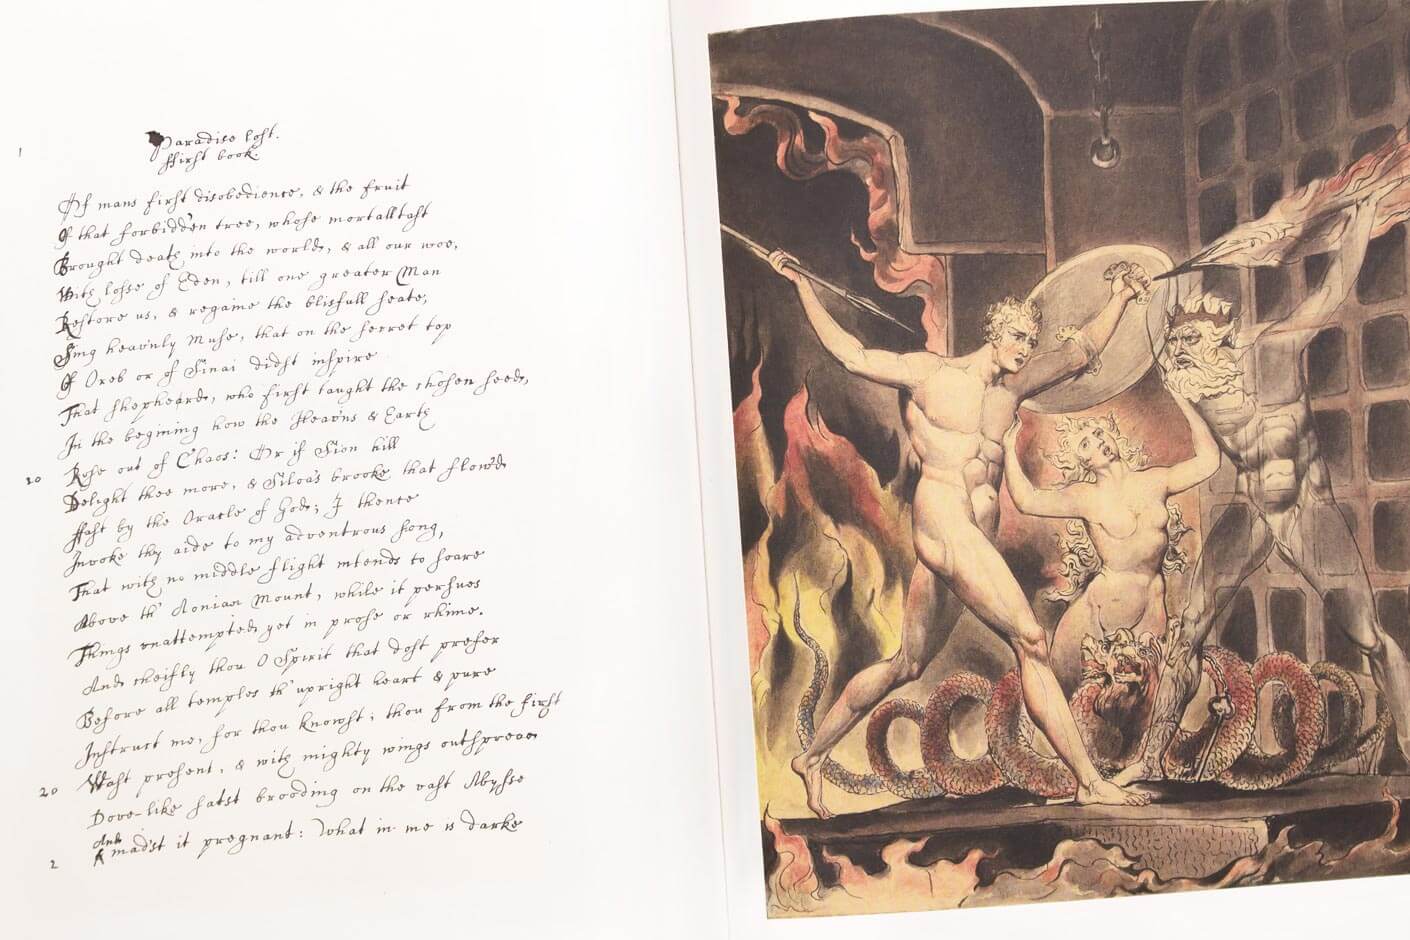 Illustrated by William Blake